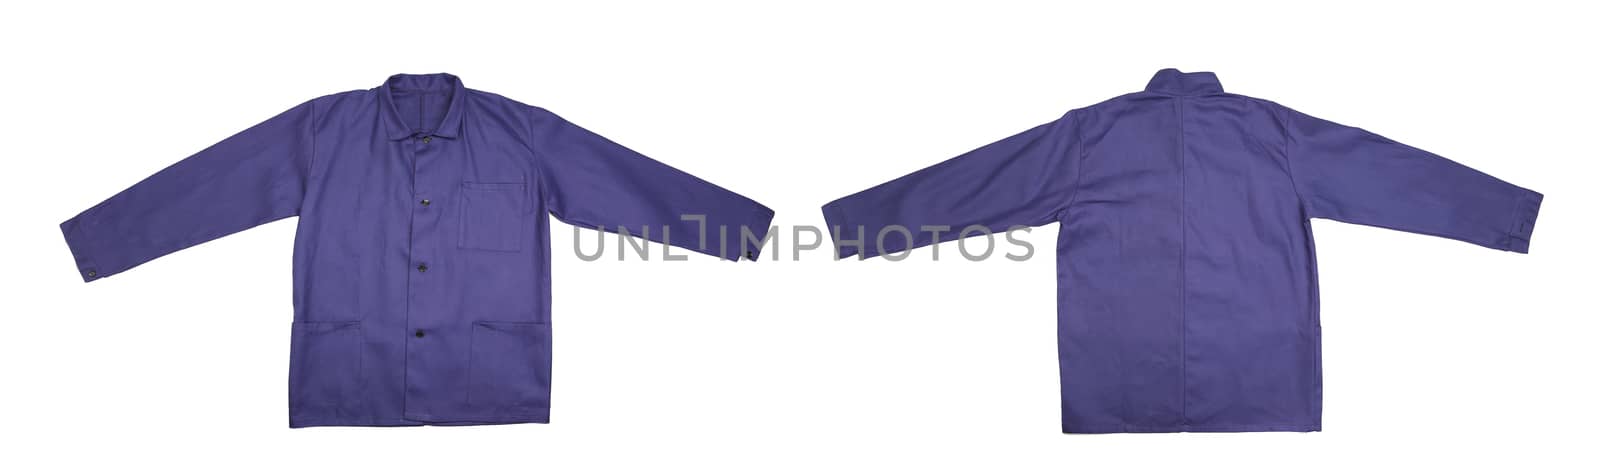 Blue coat back and front view. Isolated on a white background